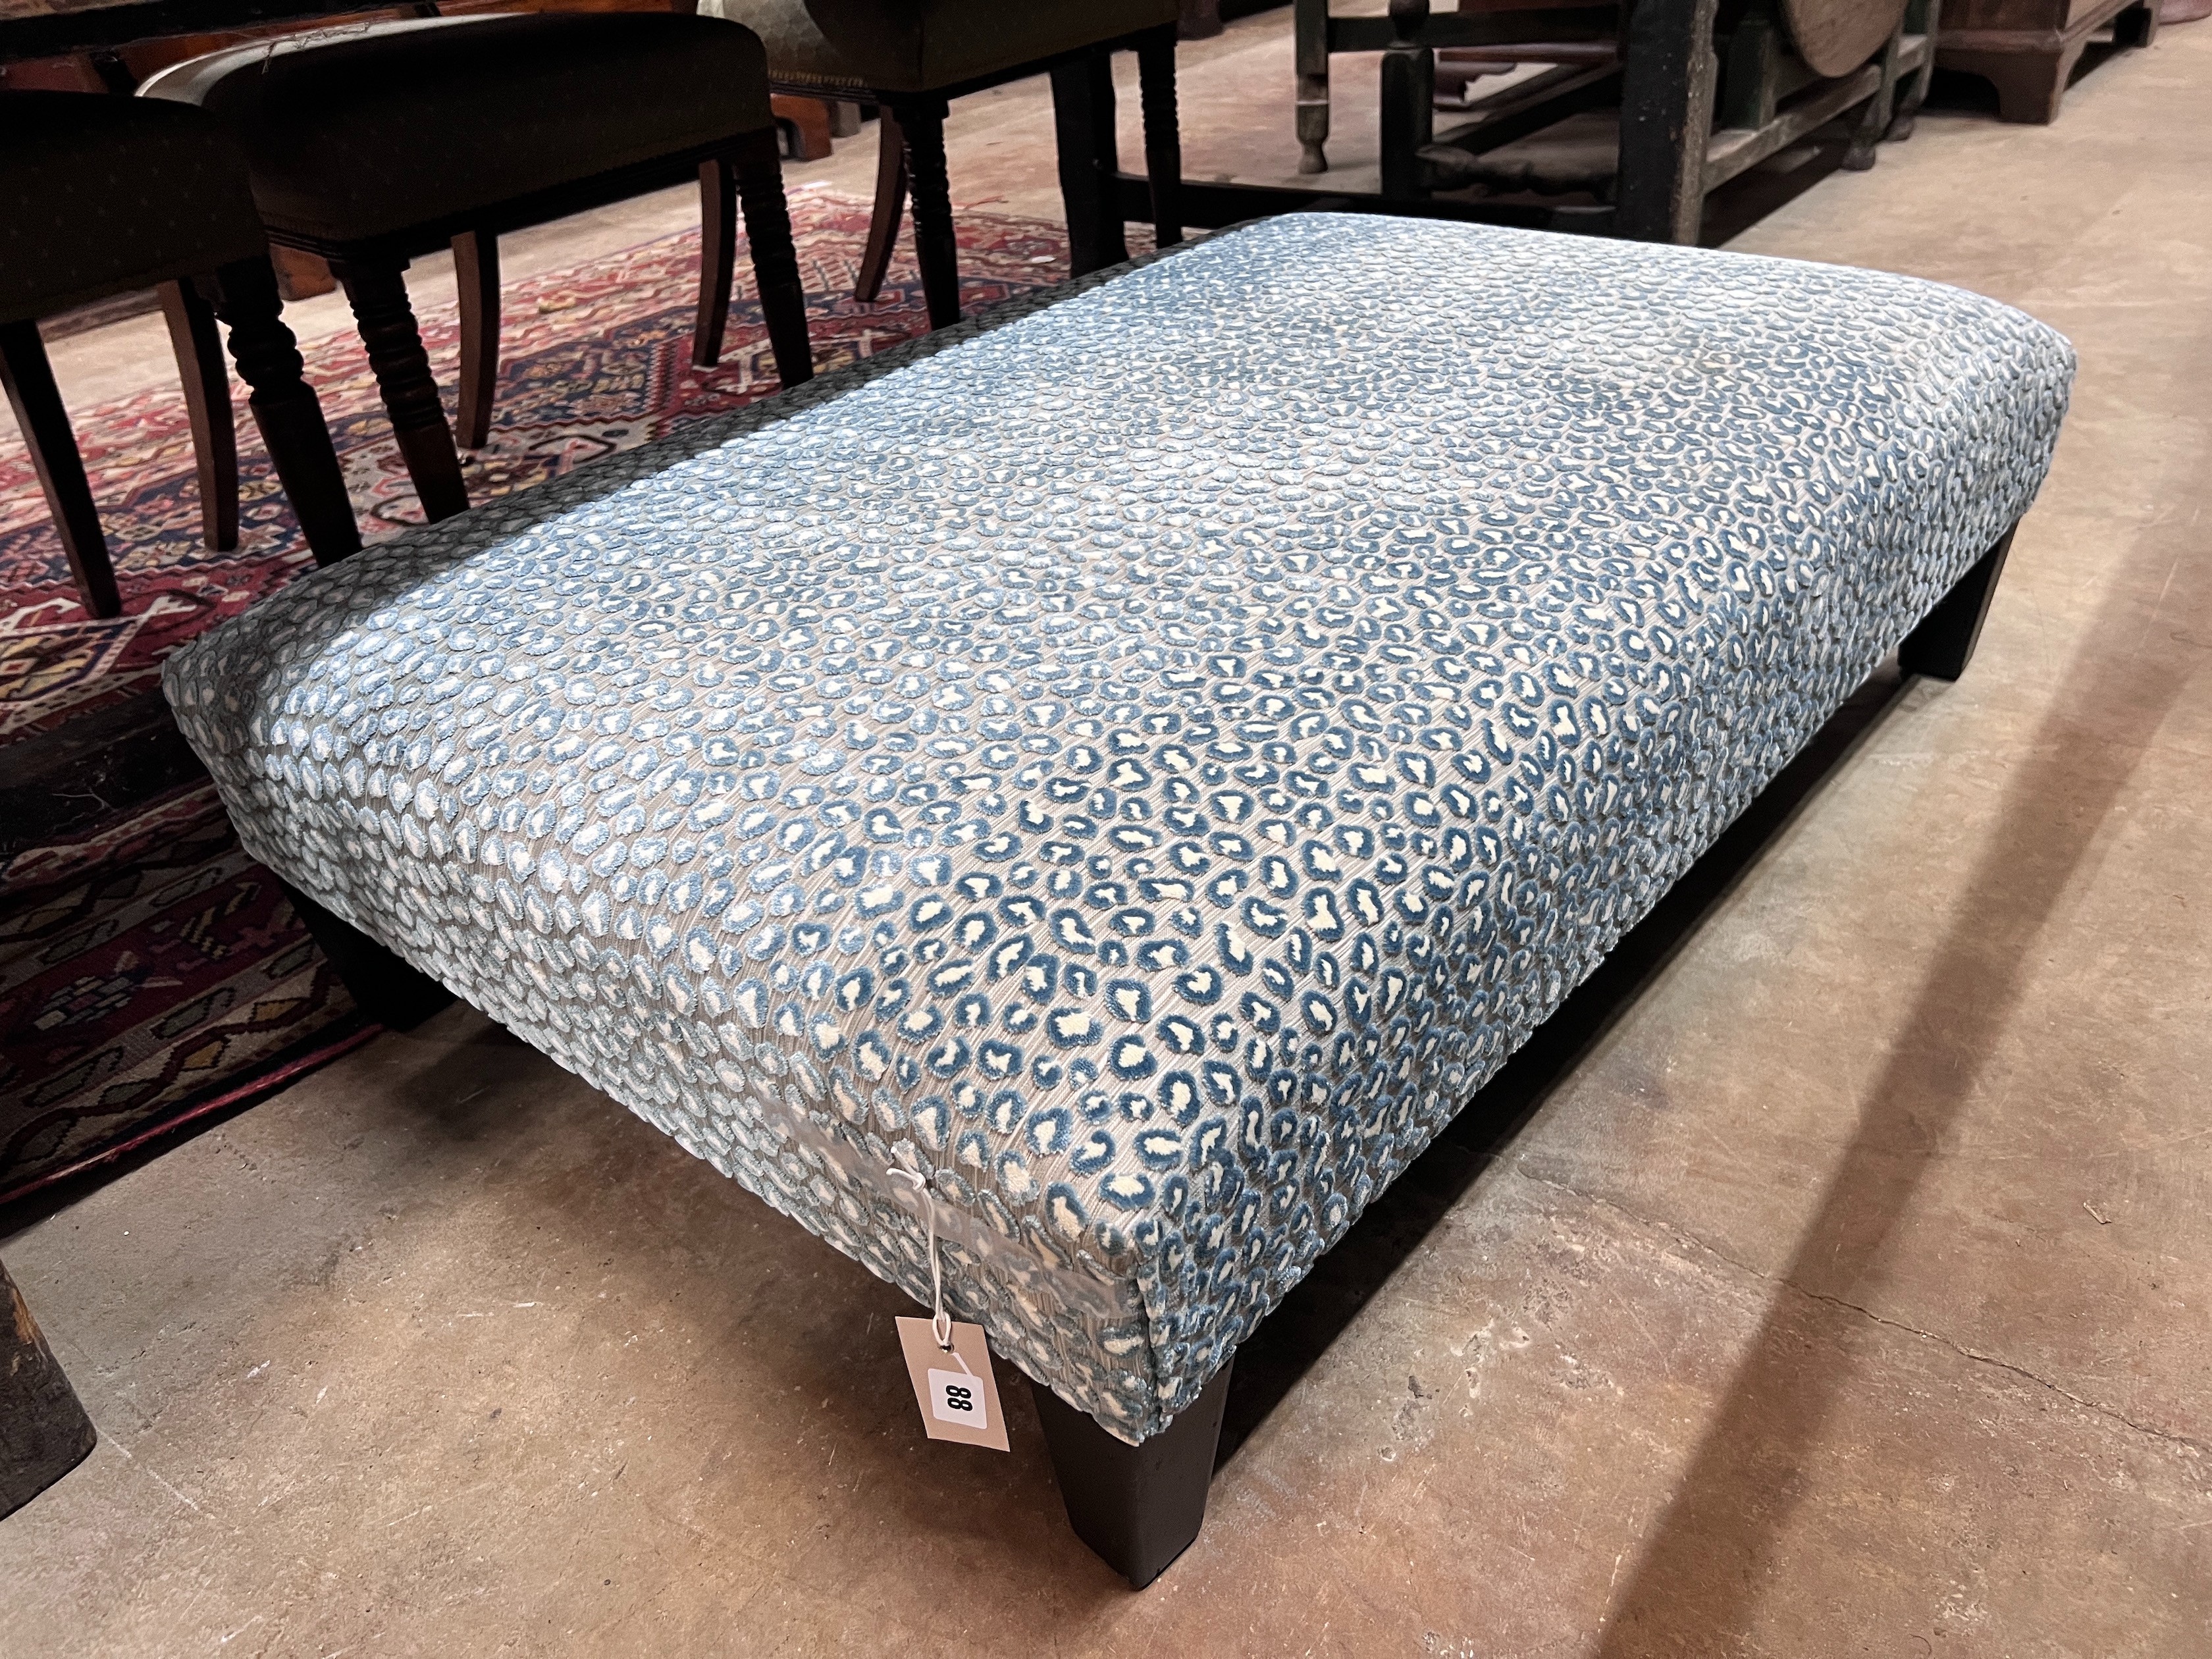 A Colefax & Fowler foot stool, length 103cm, depth 70cm, height 28cm *Please note the sale commences at 9am.